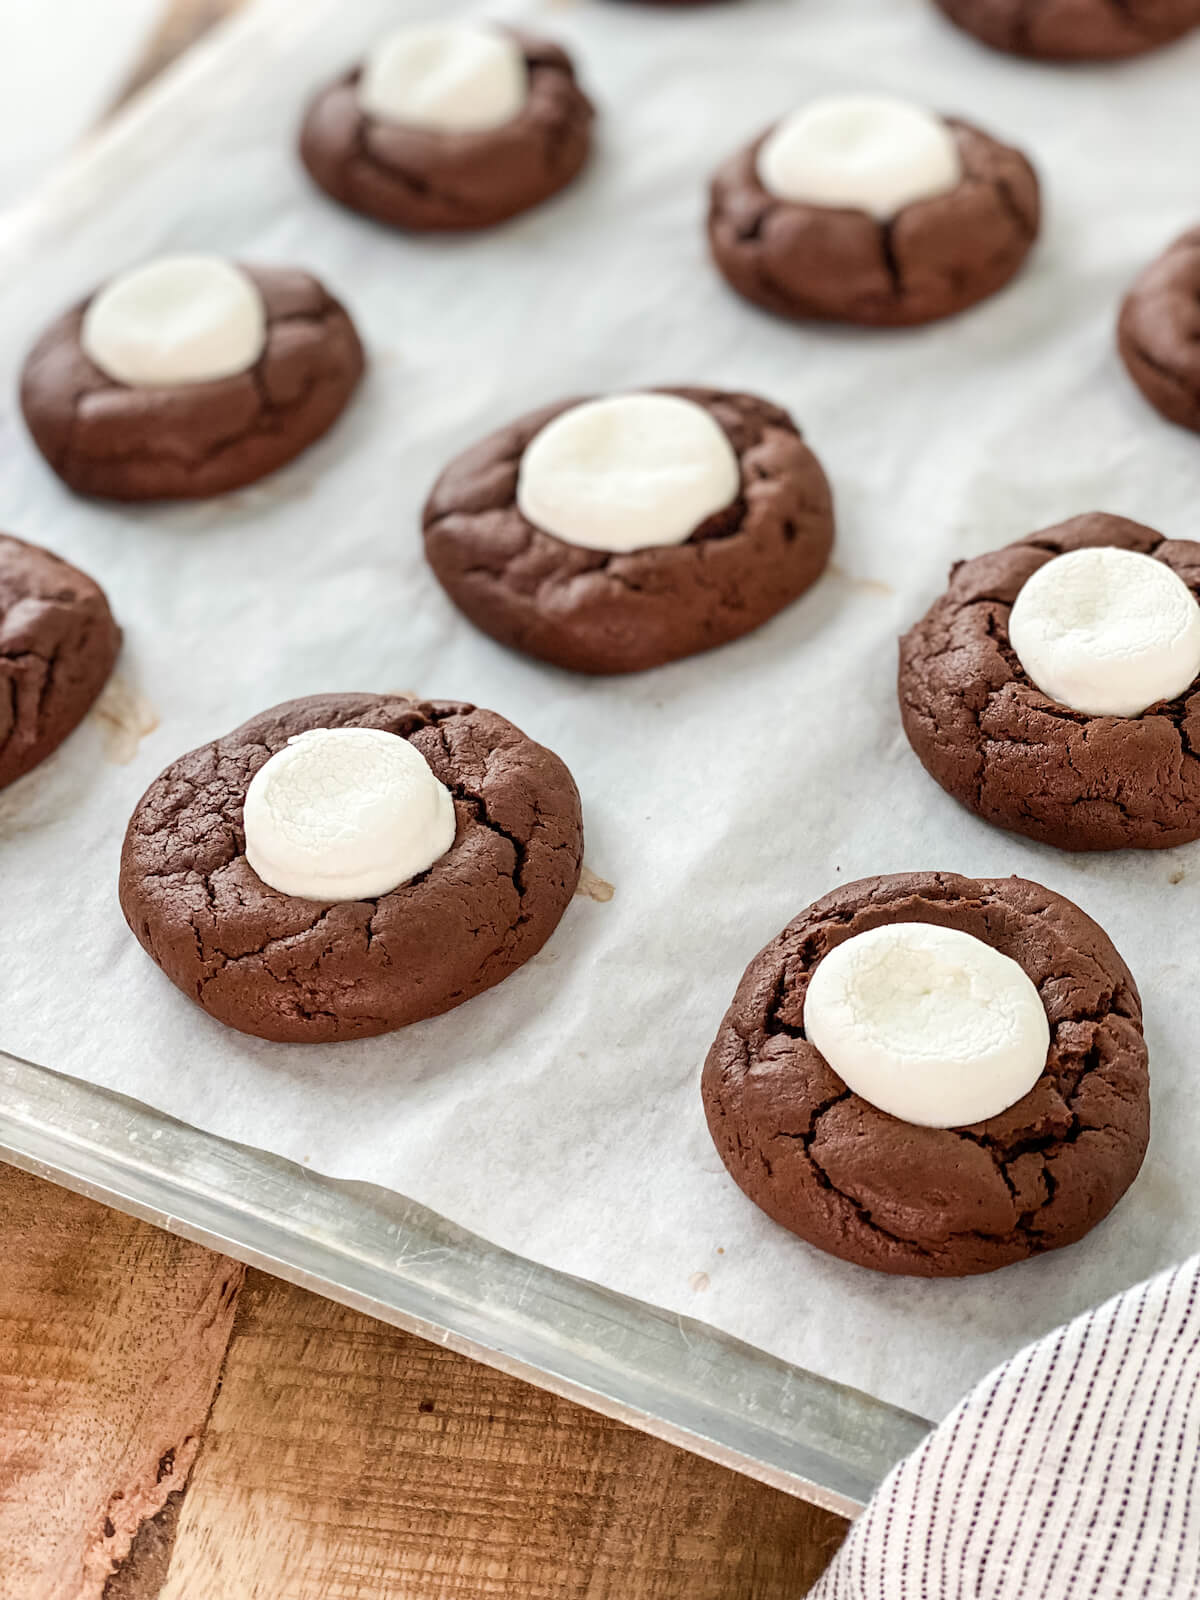 marshmallows set on top of chocolate cookies